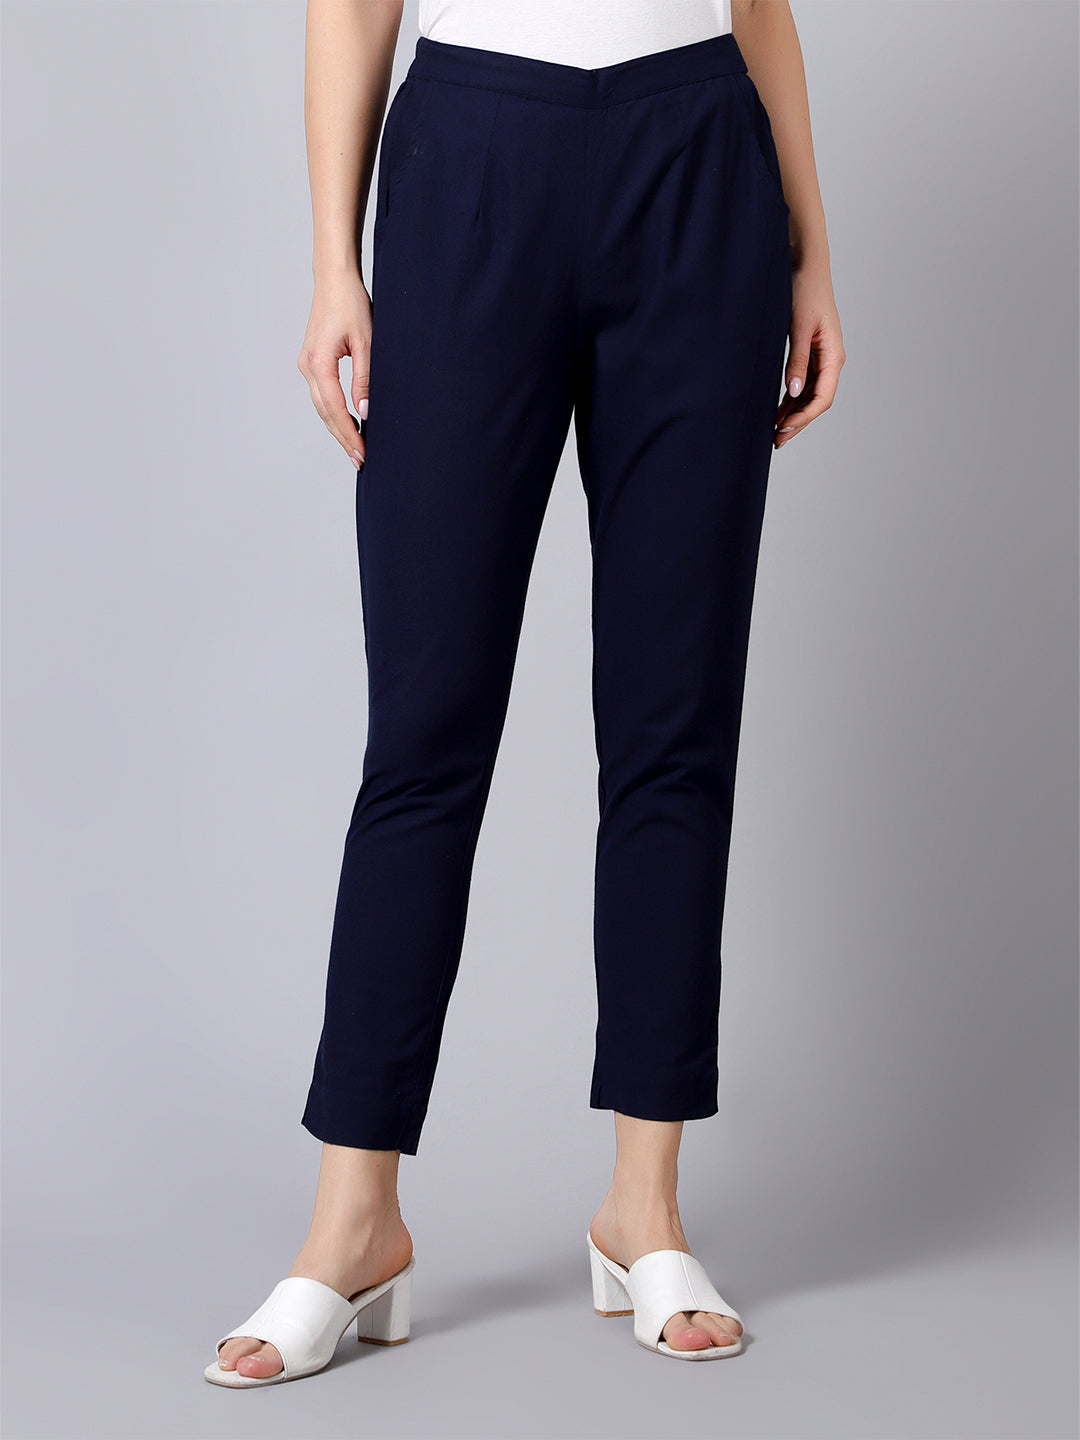 Navy Blue Solid Pants